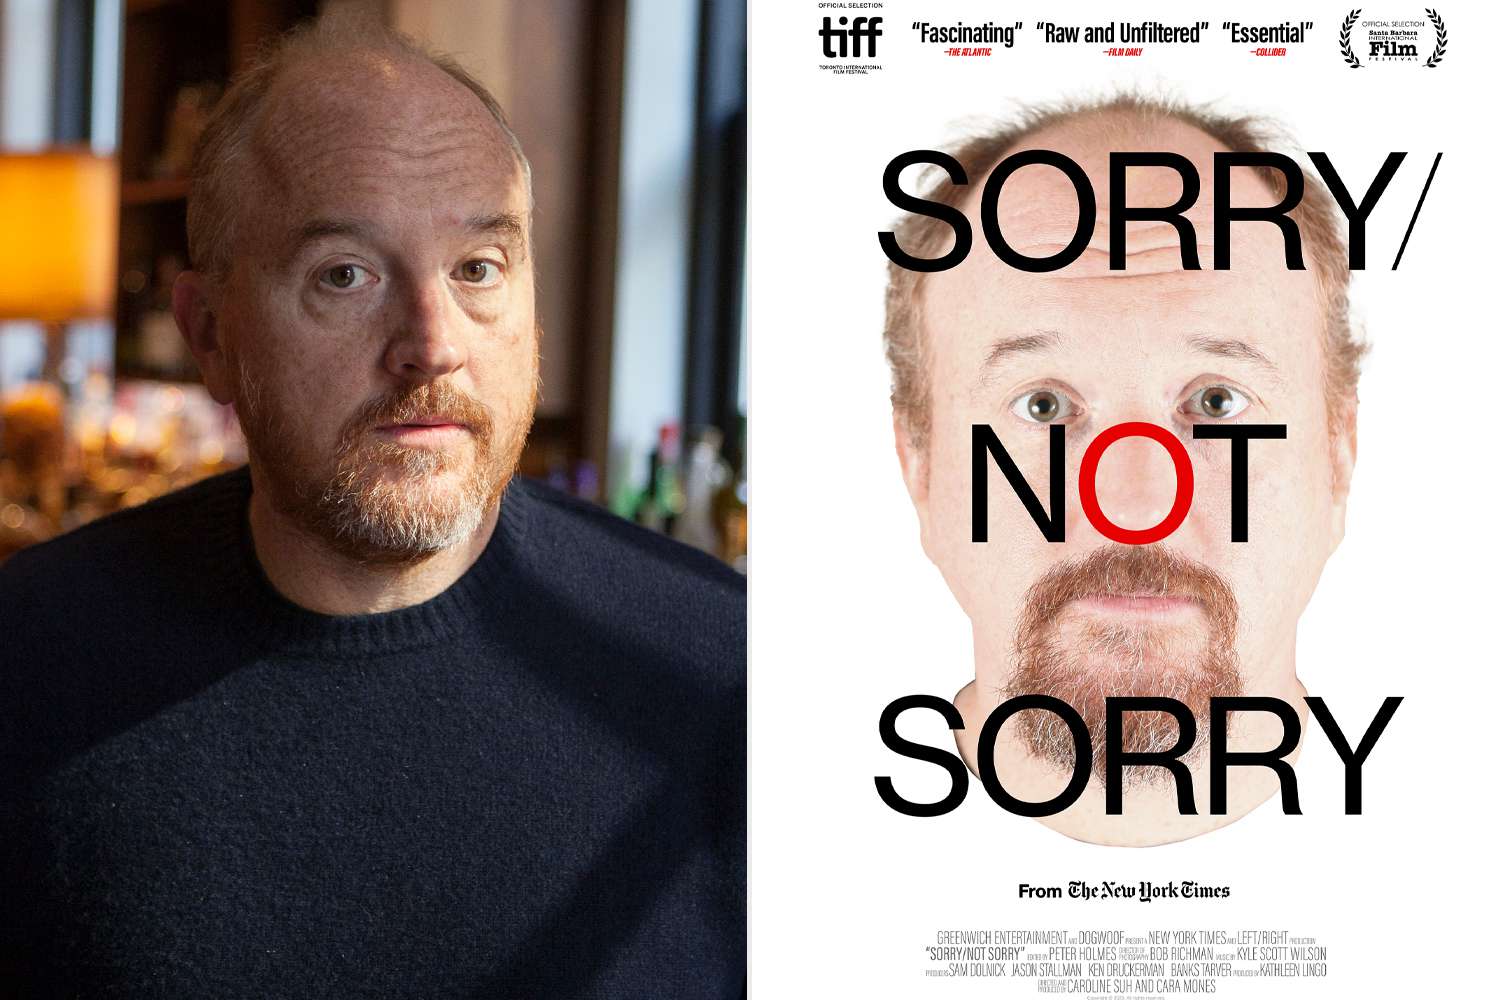 The Biggest Bombshells About Louis C.K. in the New Documentary “Sorry/Not Sorry”